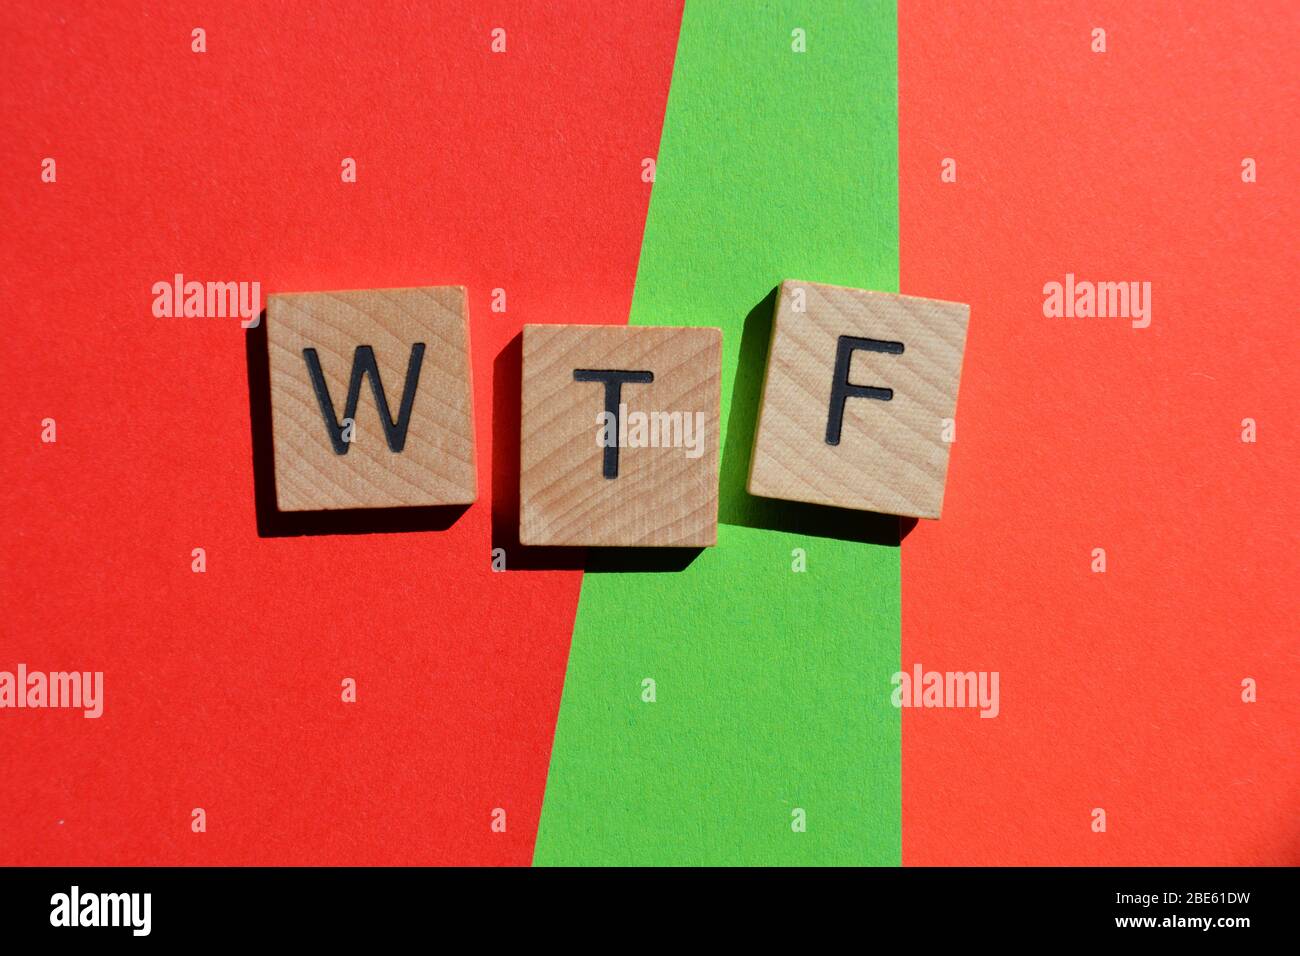 WTF, acronym used in text speak to express surprise and disbelief Stock Photo